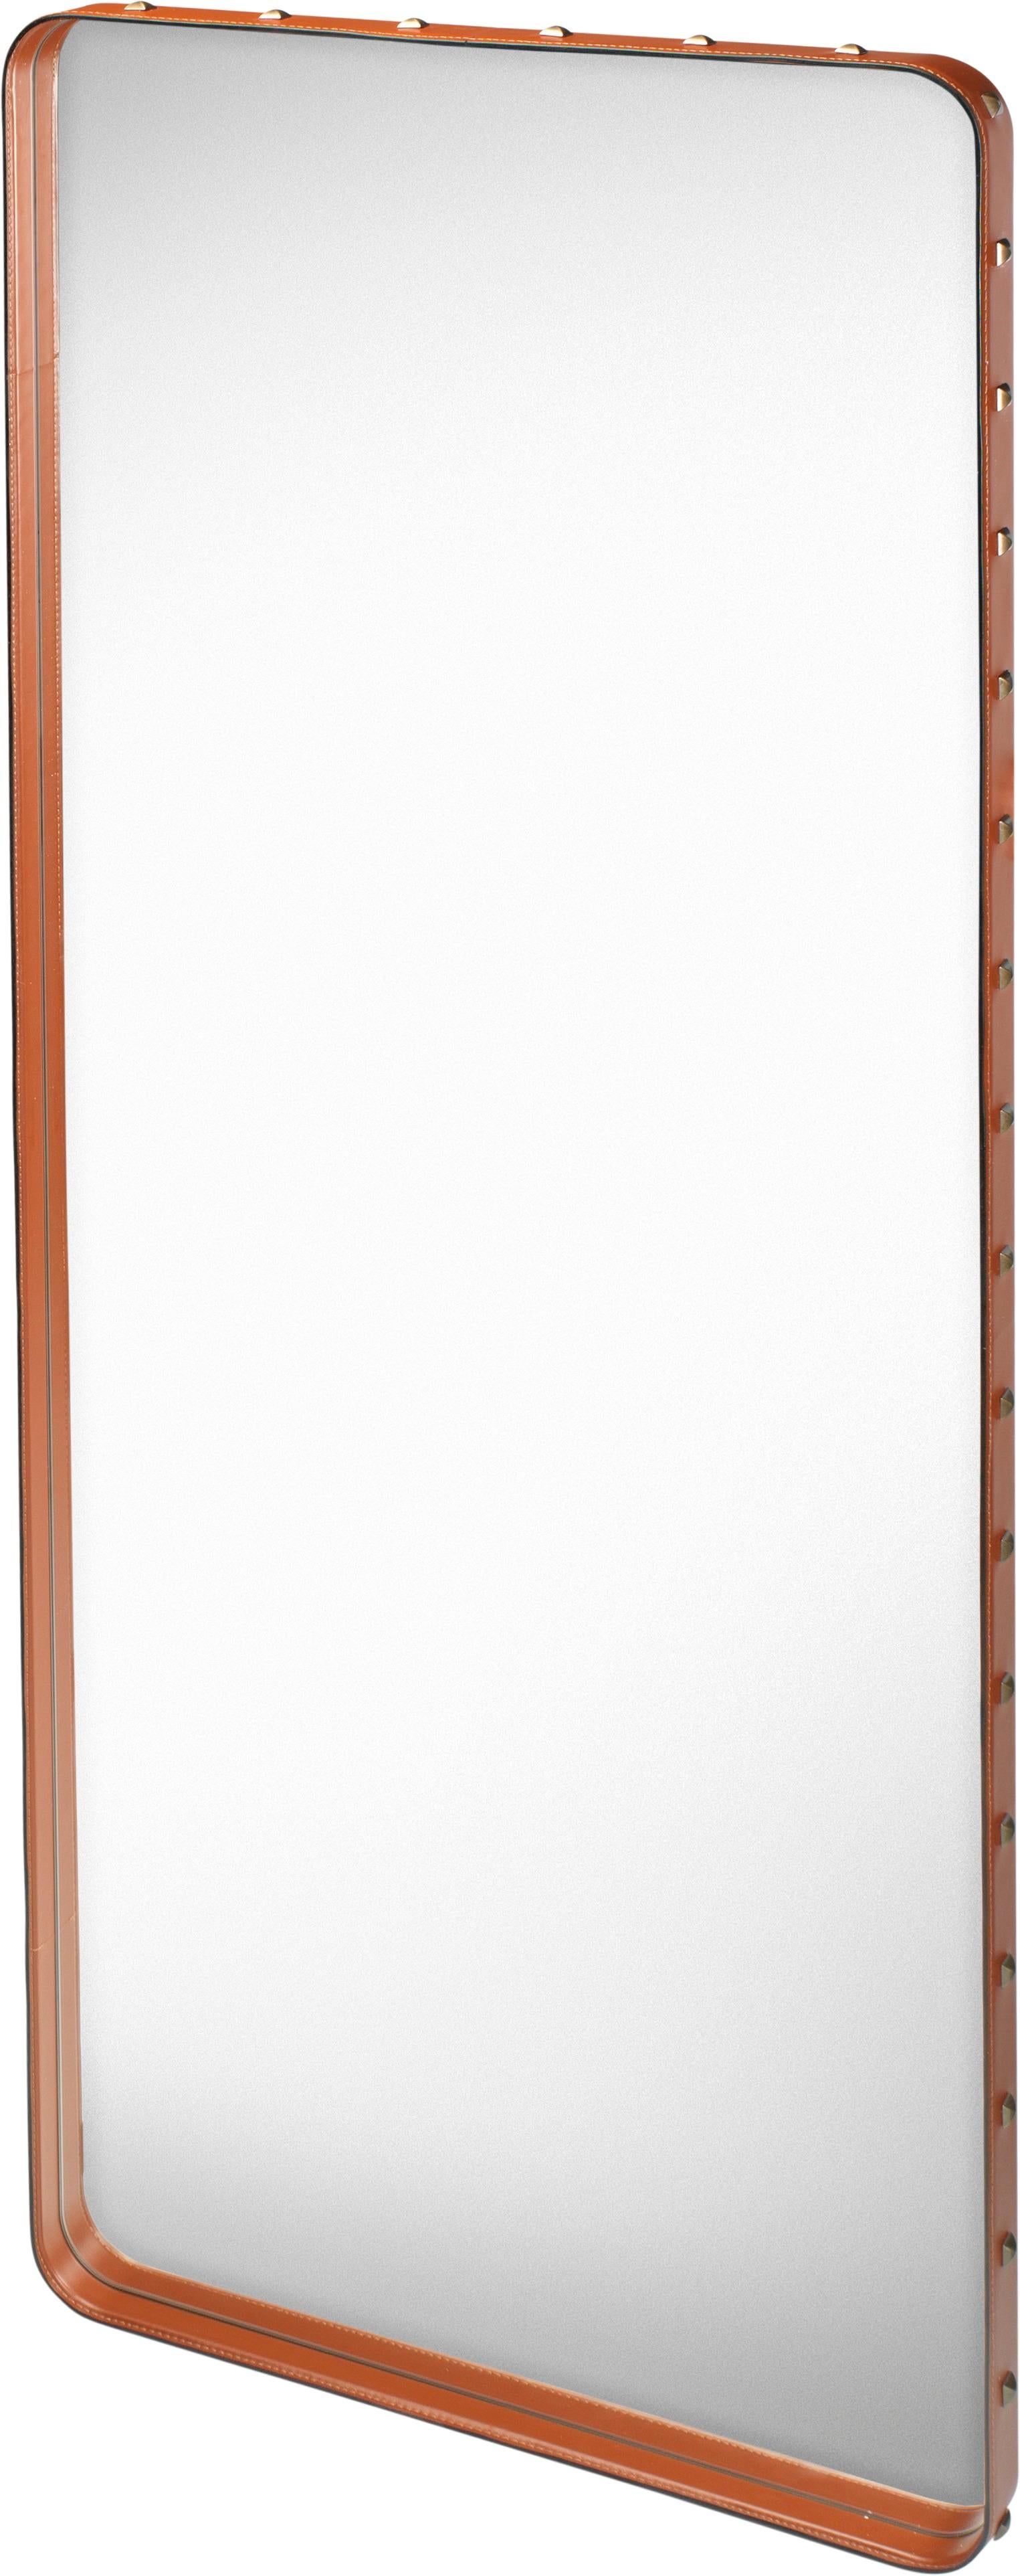 Brass Large Jacques Adnet 'Rectangulaire Mirror' Wall Mirror in Cream Leather for GUBI For Sale